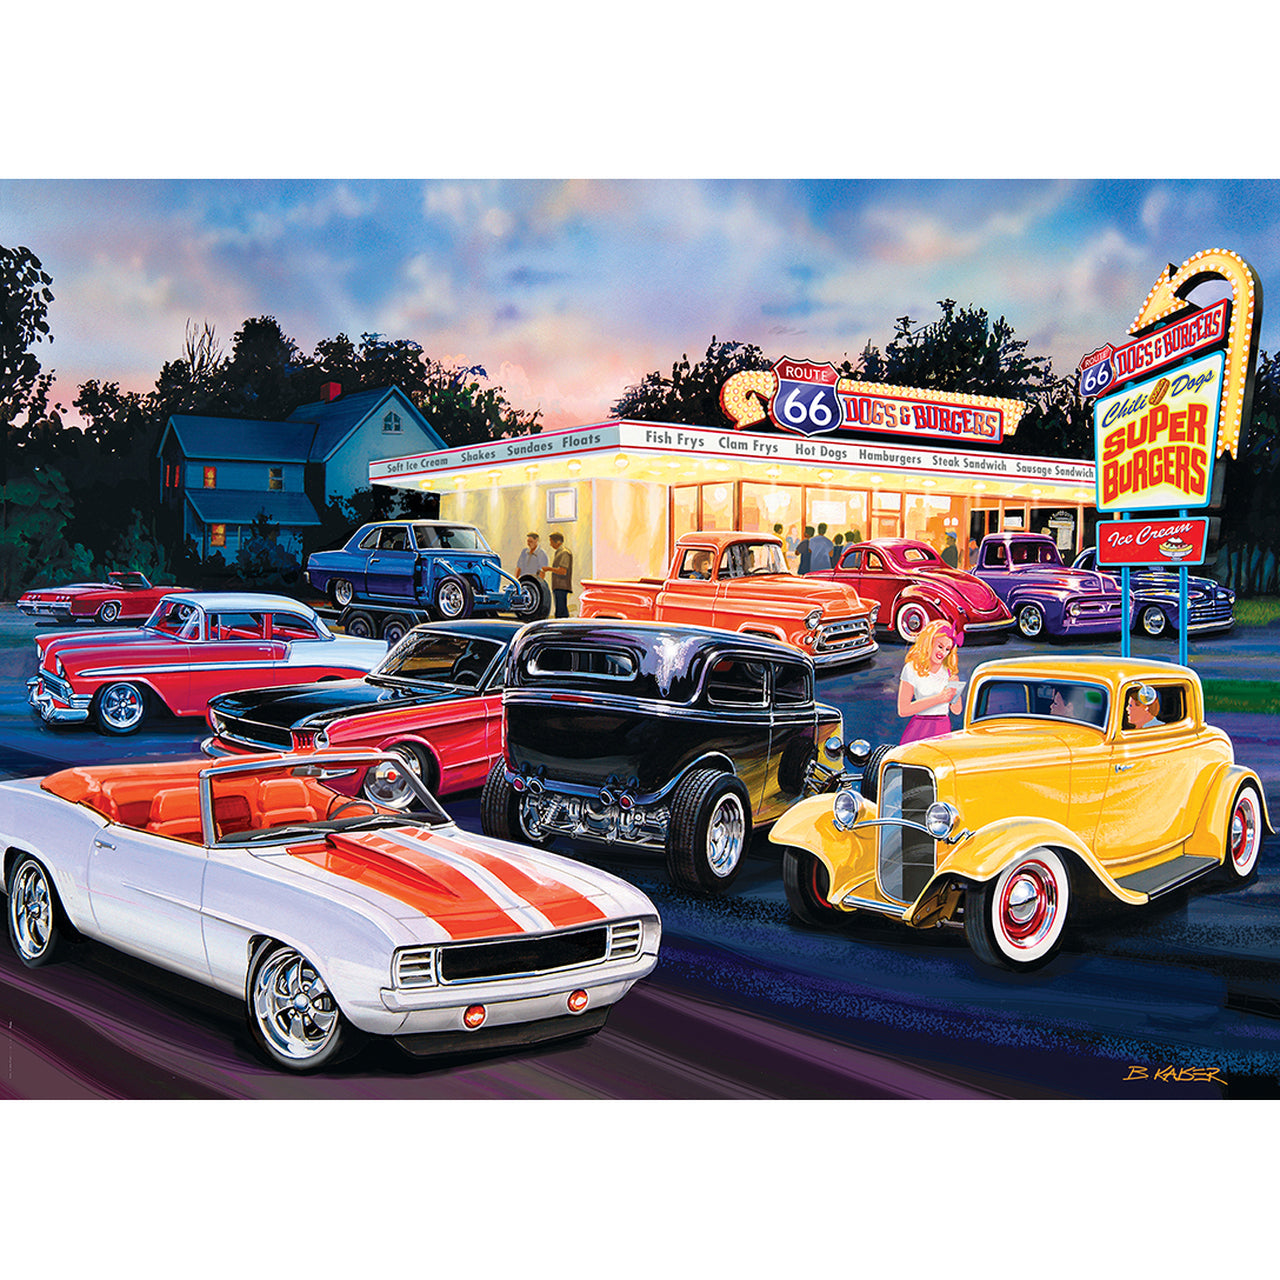 Cruisin' Route 66 - Dogs & Burgers 1000 Piece Jigsaw Puzzle by MasterPieces